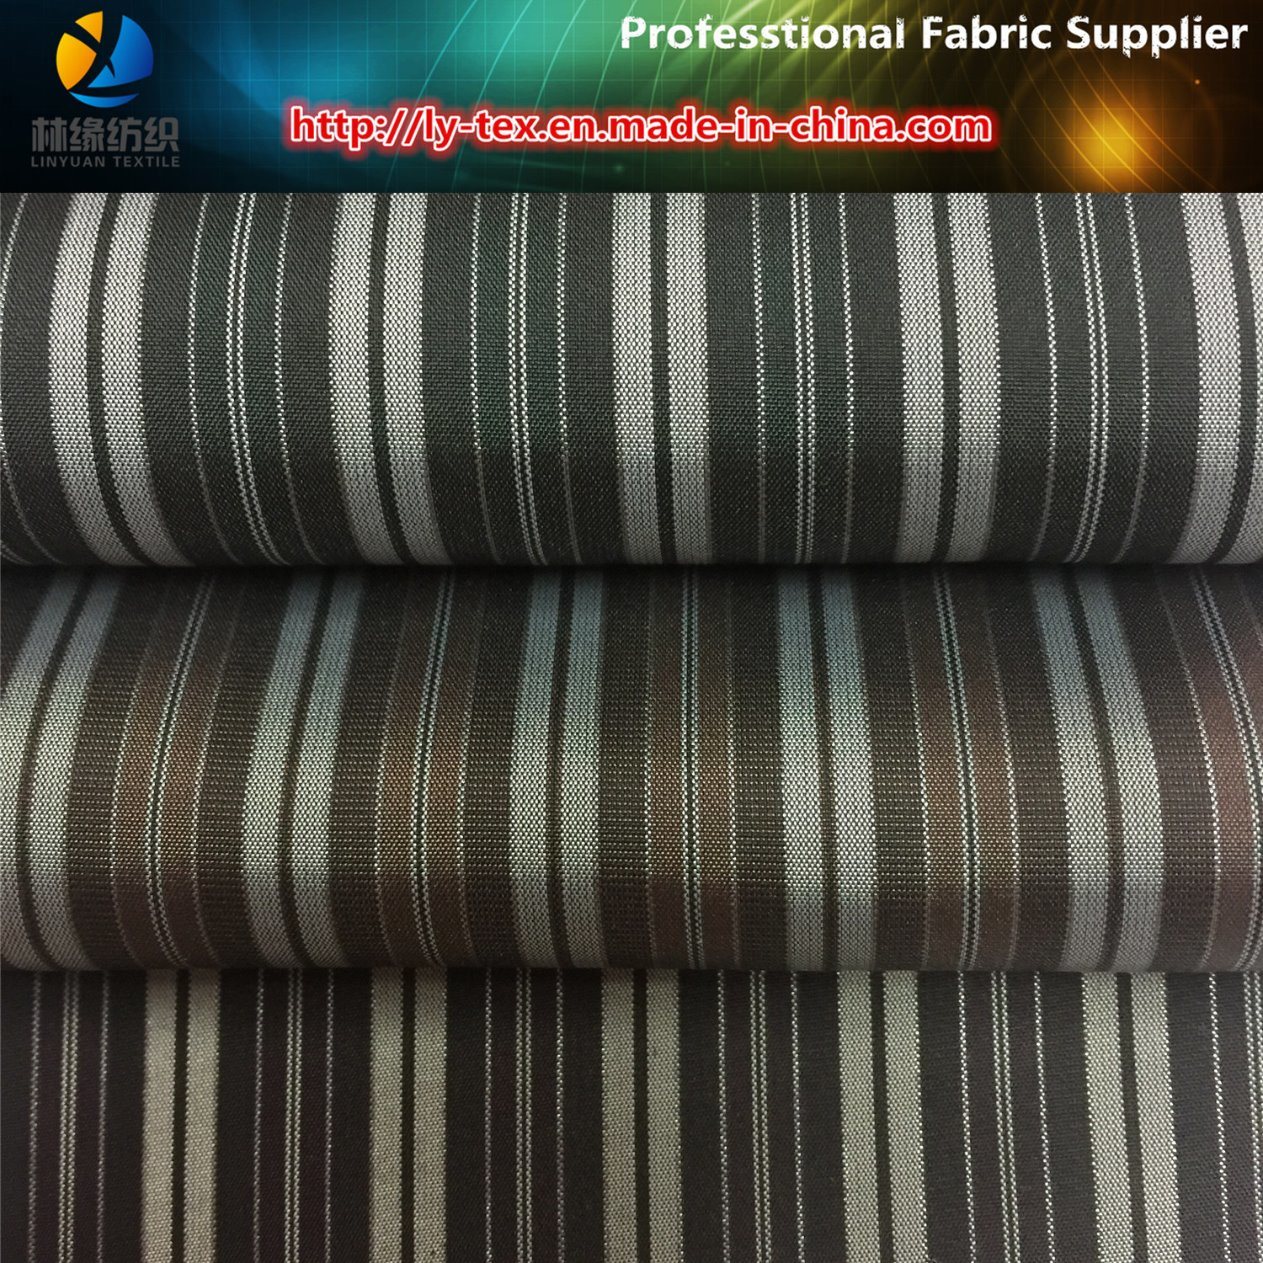 Prompt Goods Polyester Twill Stripe Fabric for Men Suit Lining (X115-117)